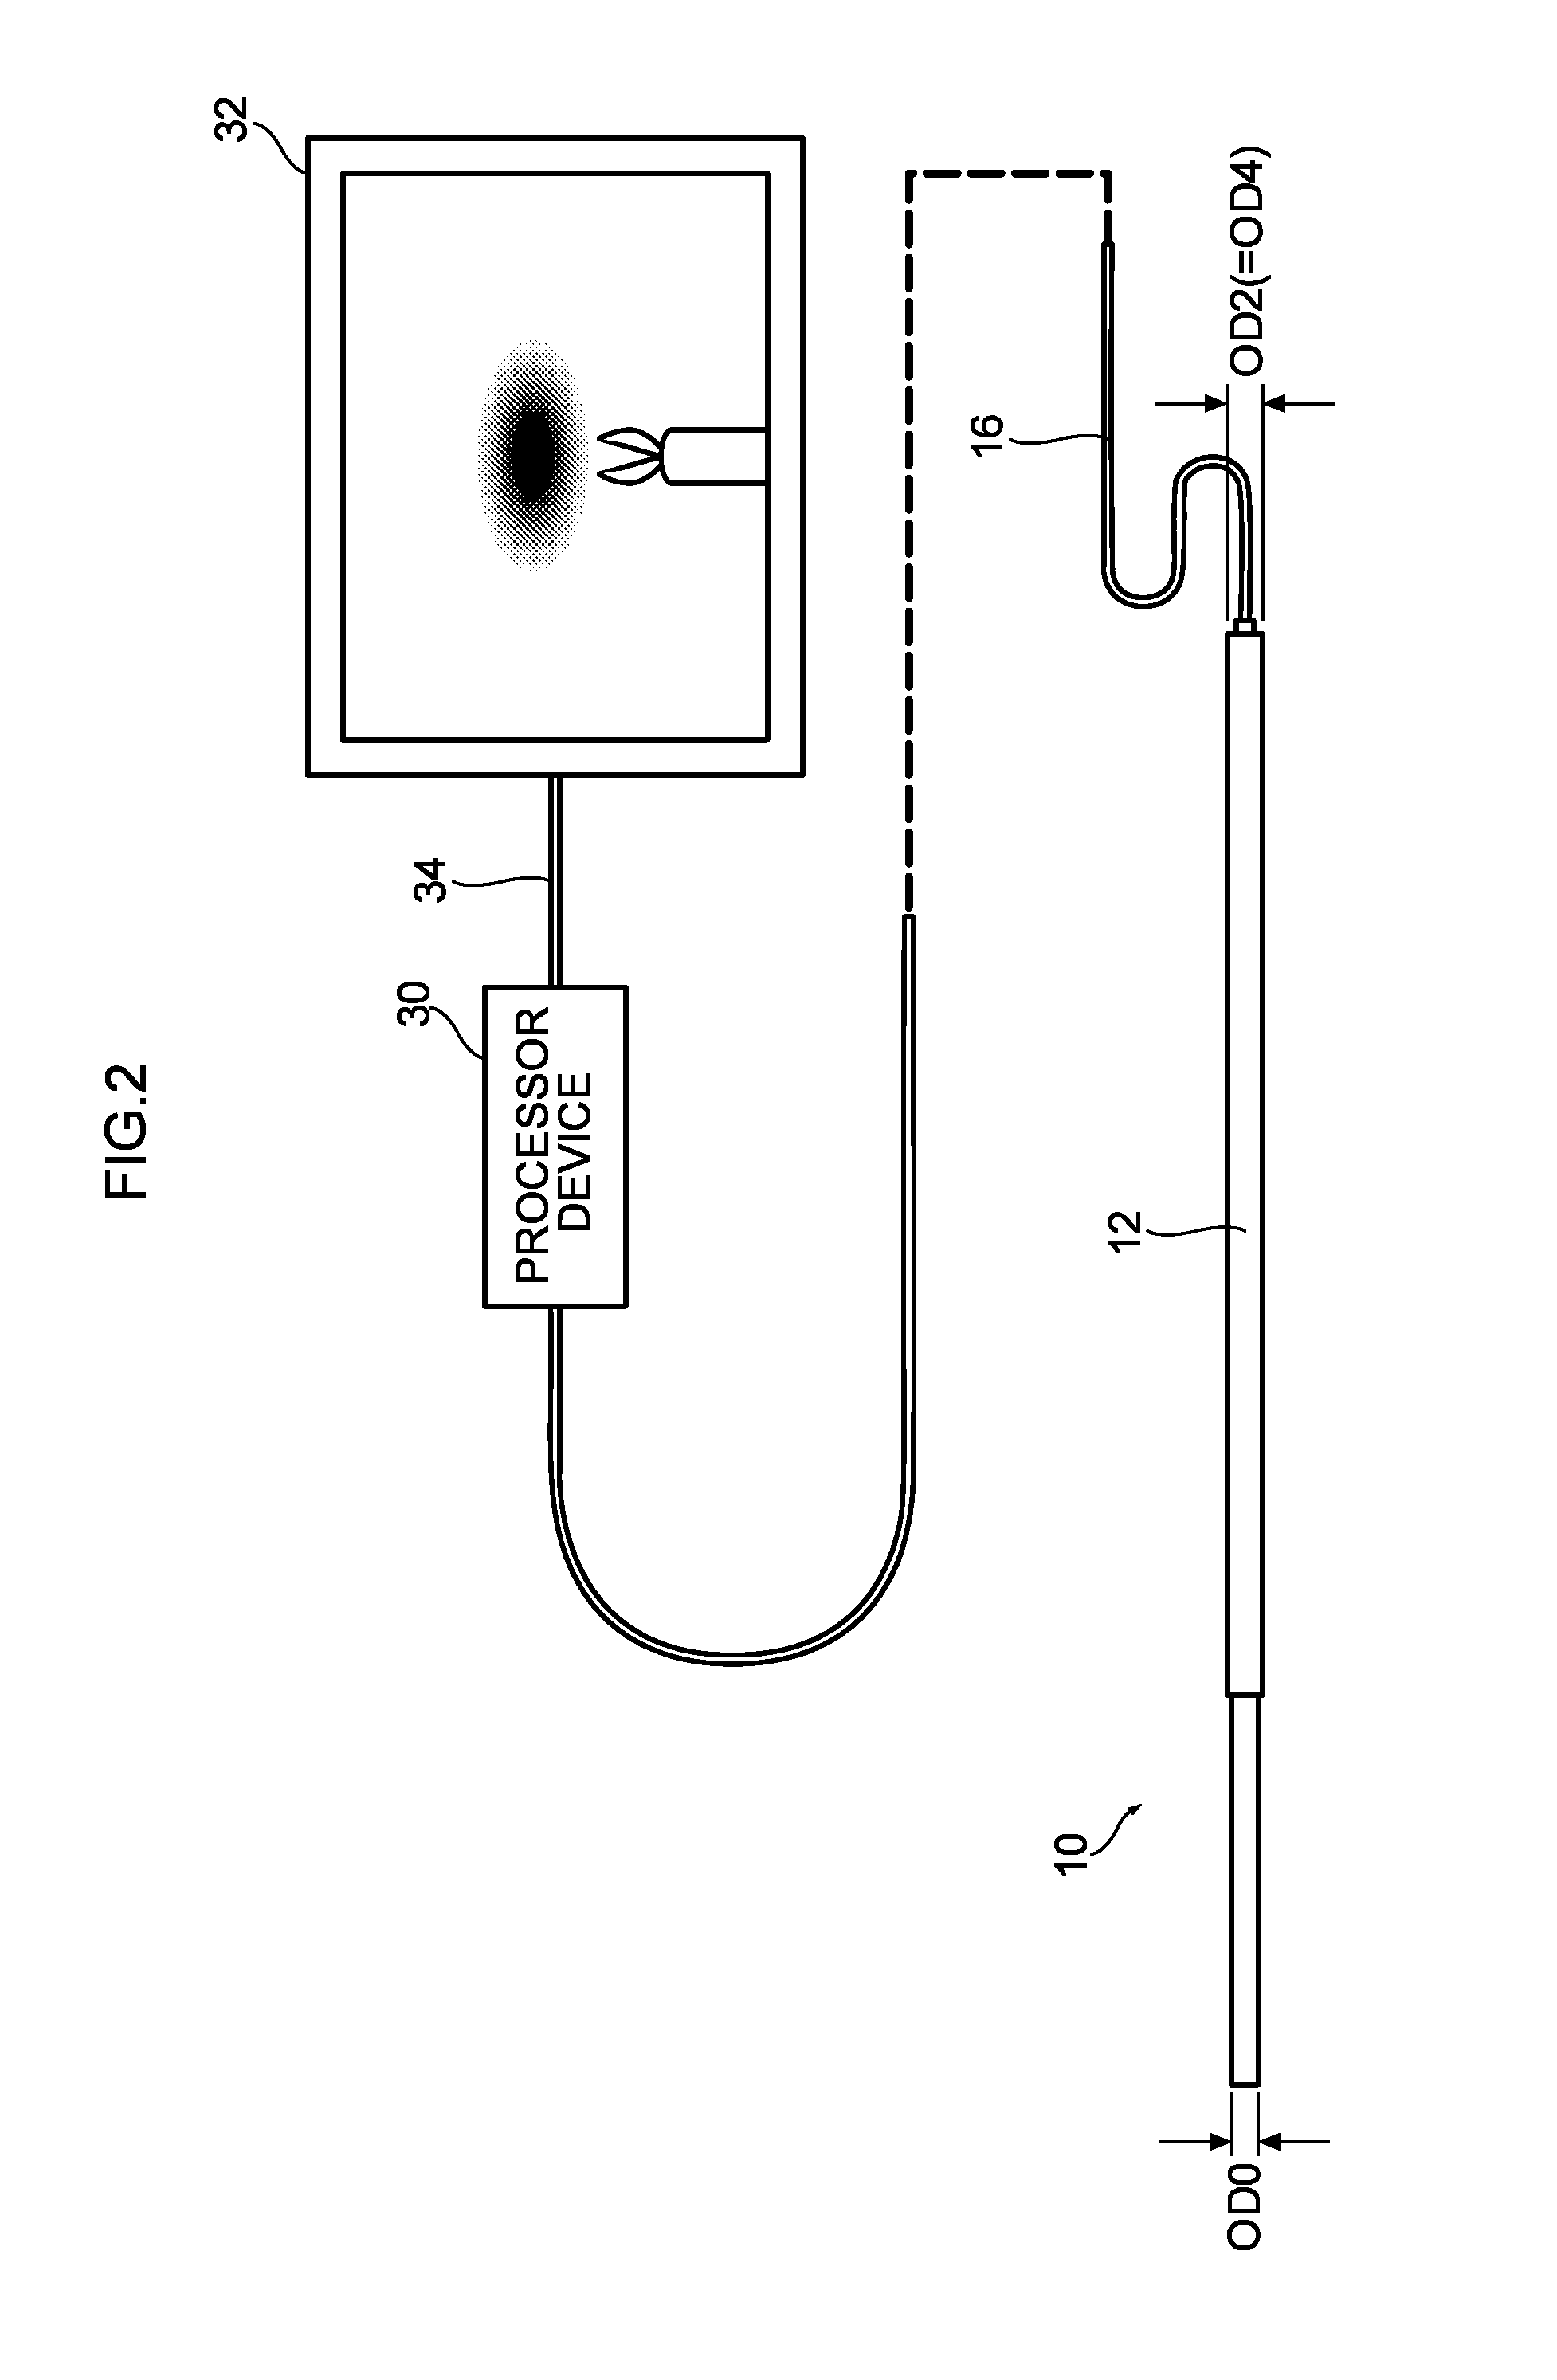 Surgical device, outer tube, endoscope, and treatment tool